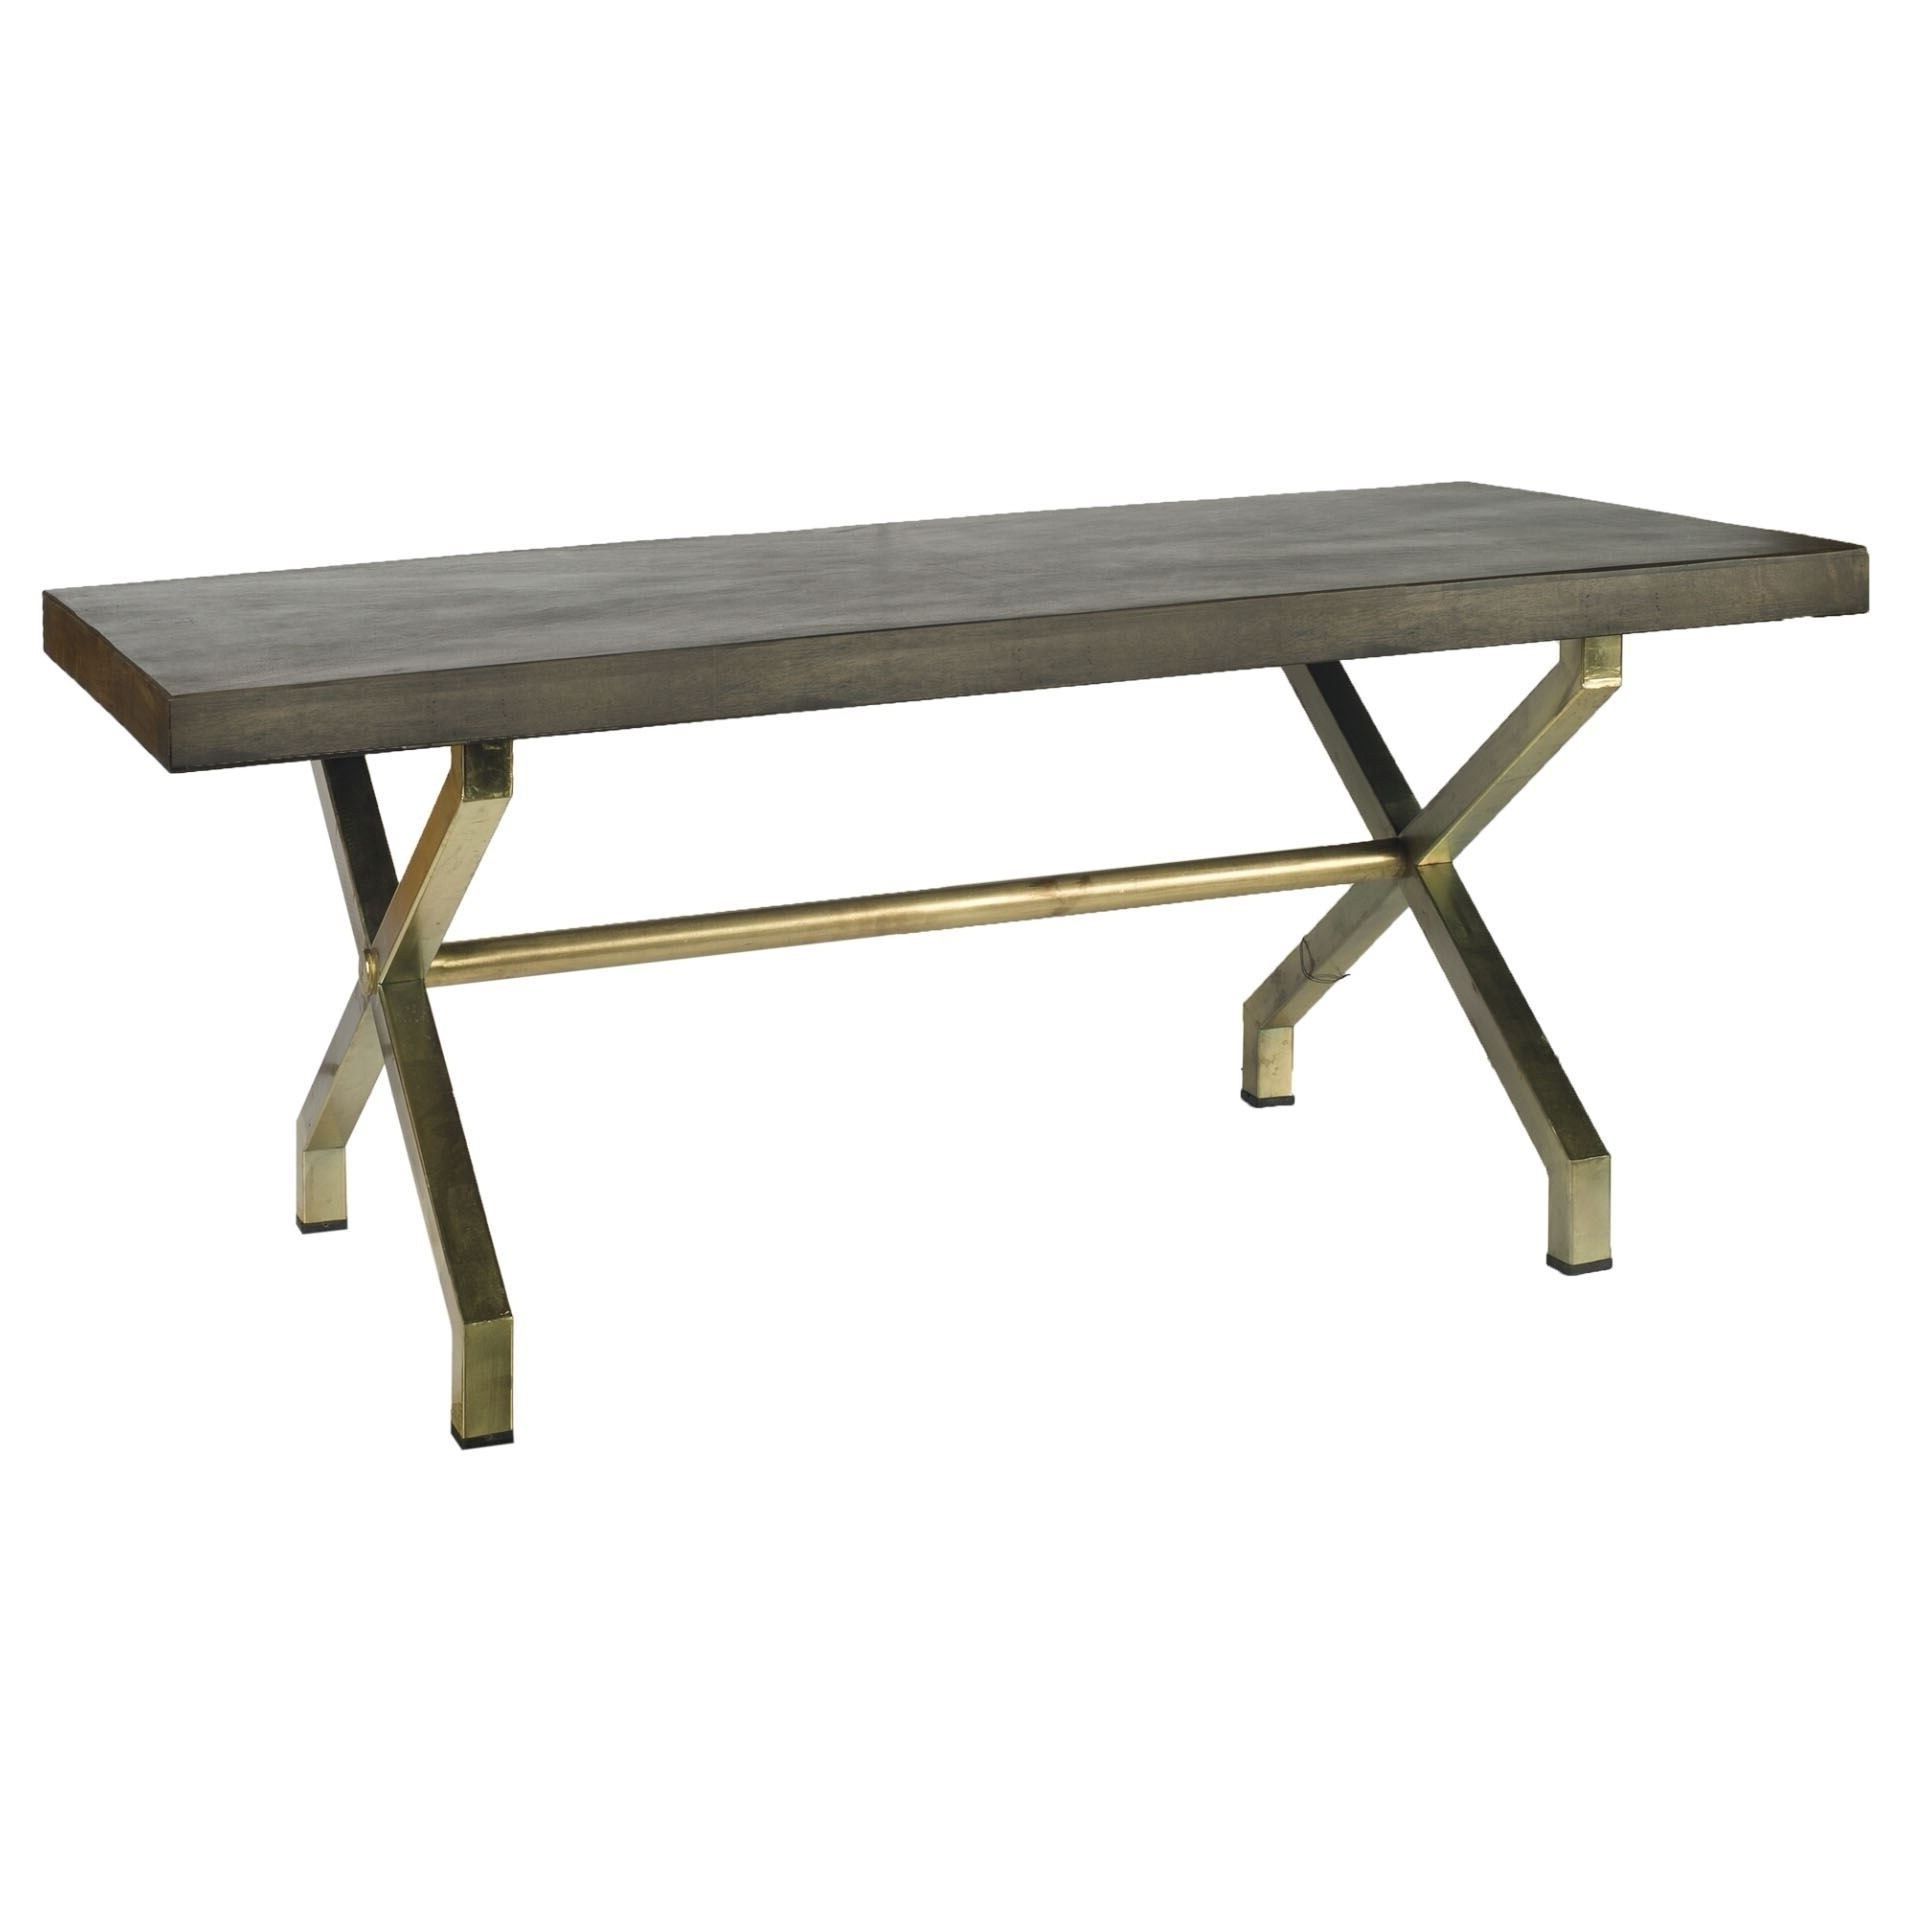 Mercana Arrow I Dark Walnut/antiqued Brass Wood/iron Within Popular Mccrimmon 36'' Mango Solid Wood Dining Tables (View 14 of 20)